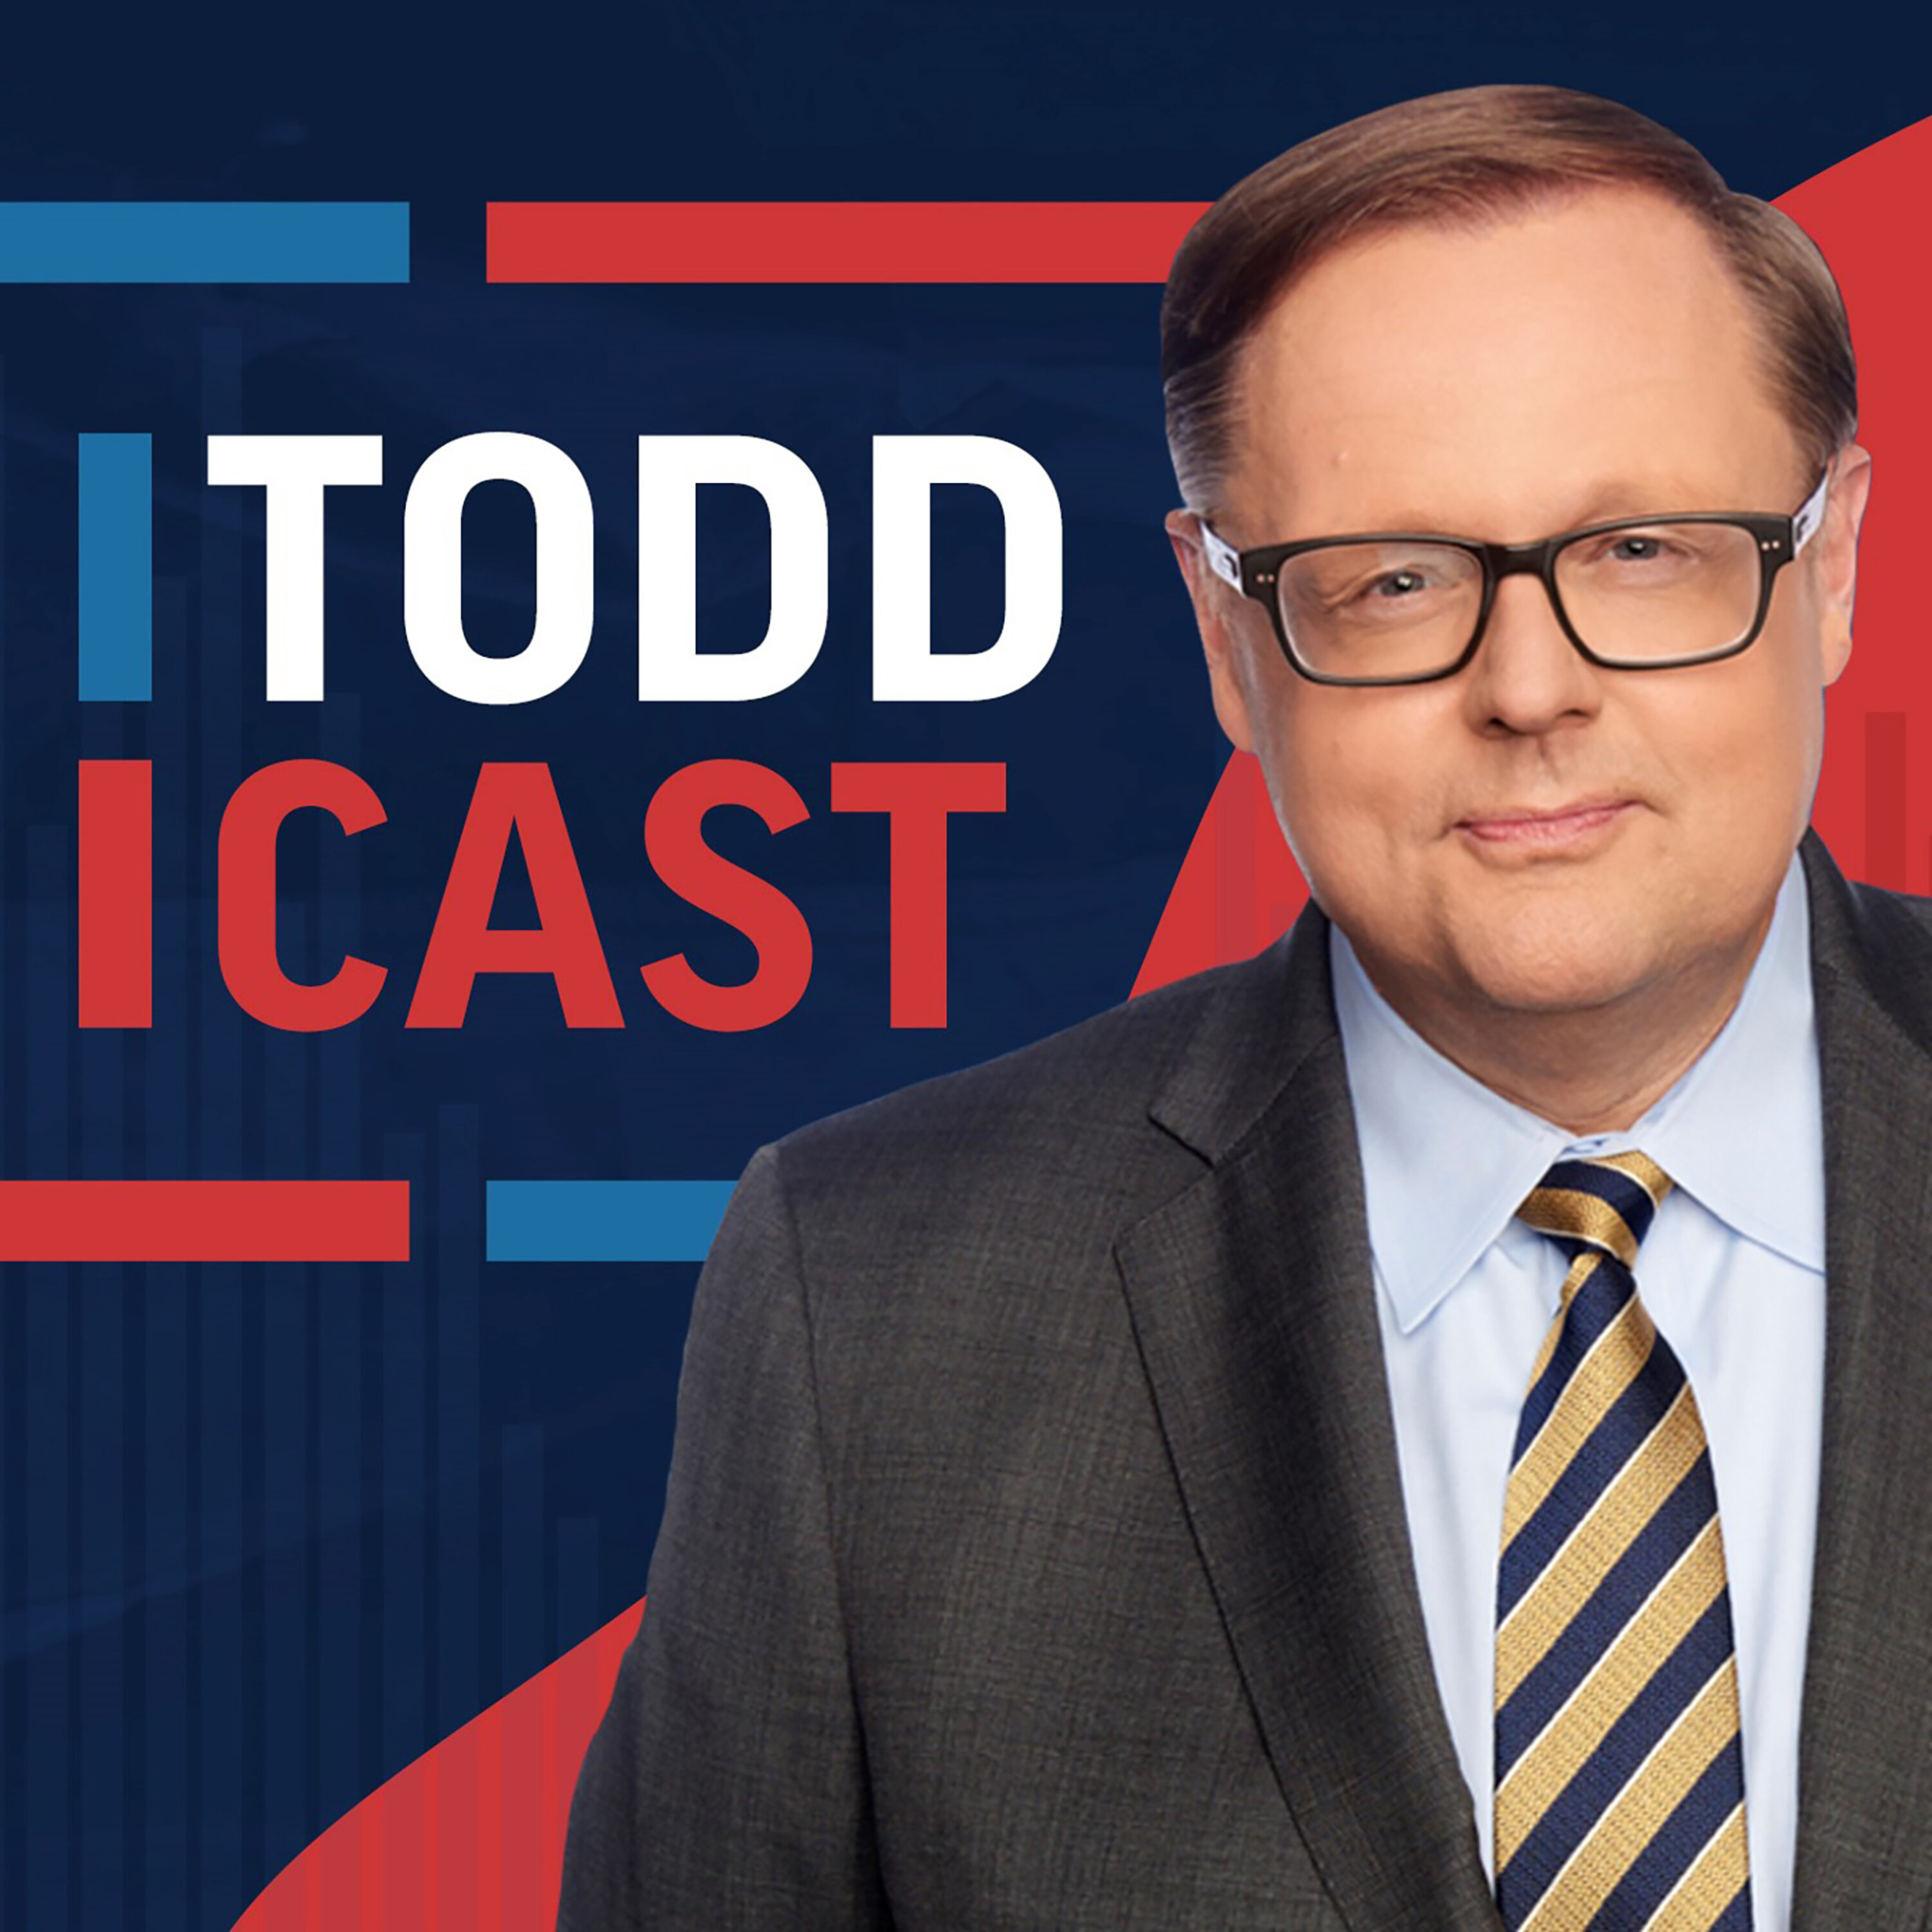 ToddCast Podcast with Todd Starnes